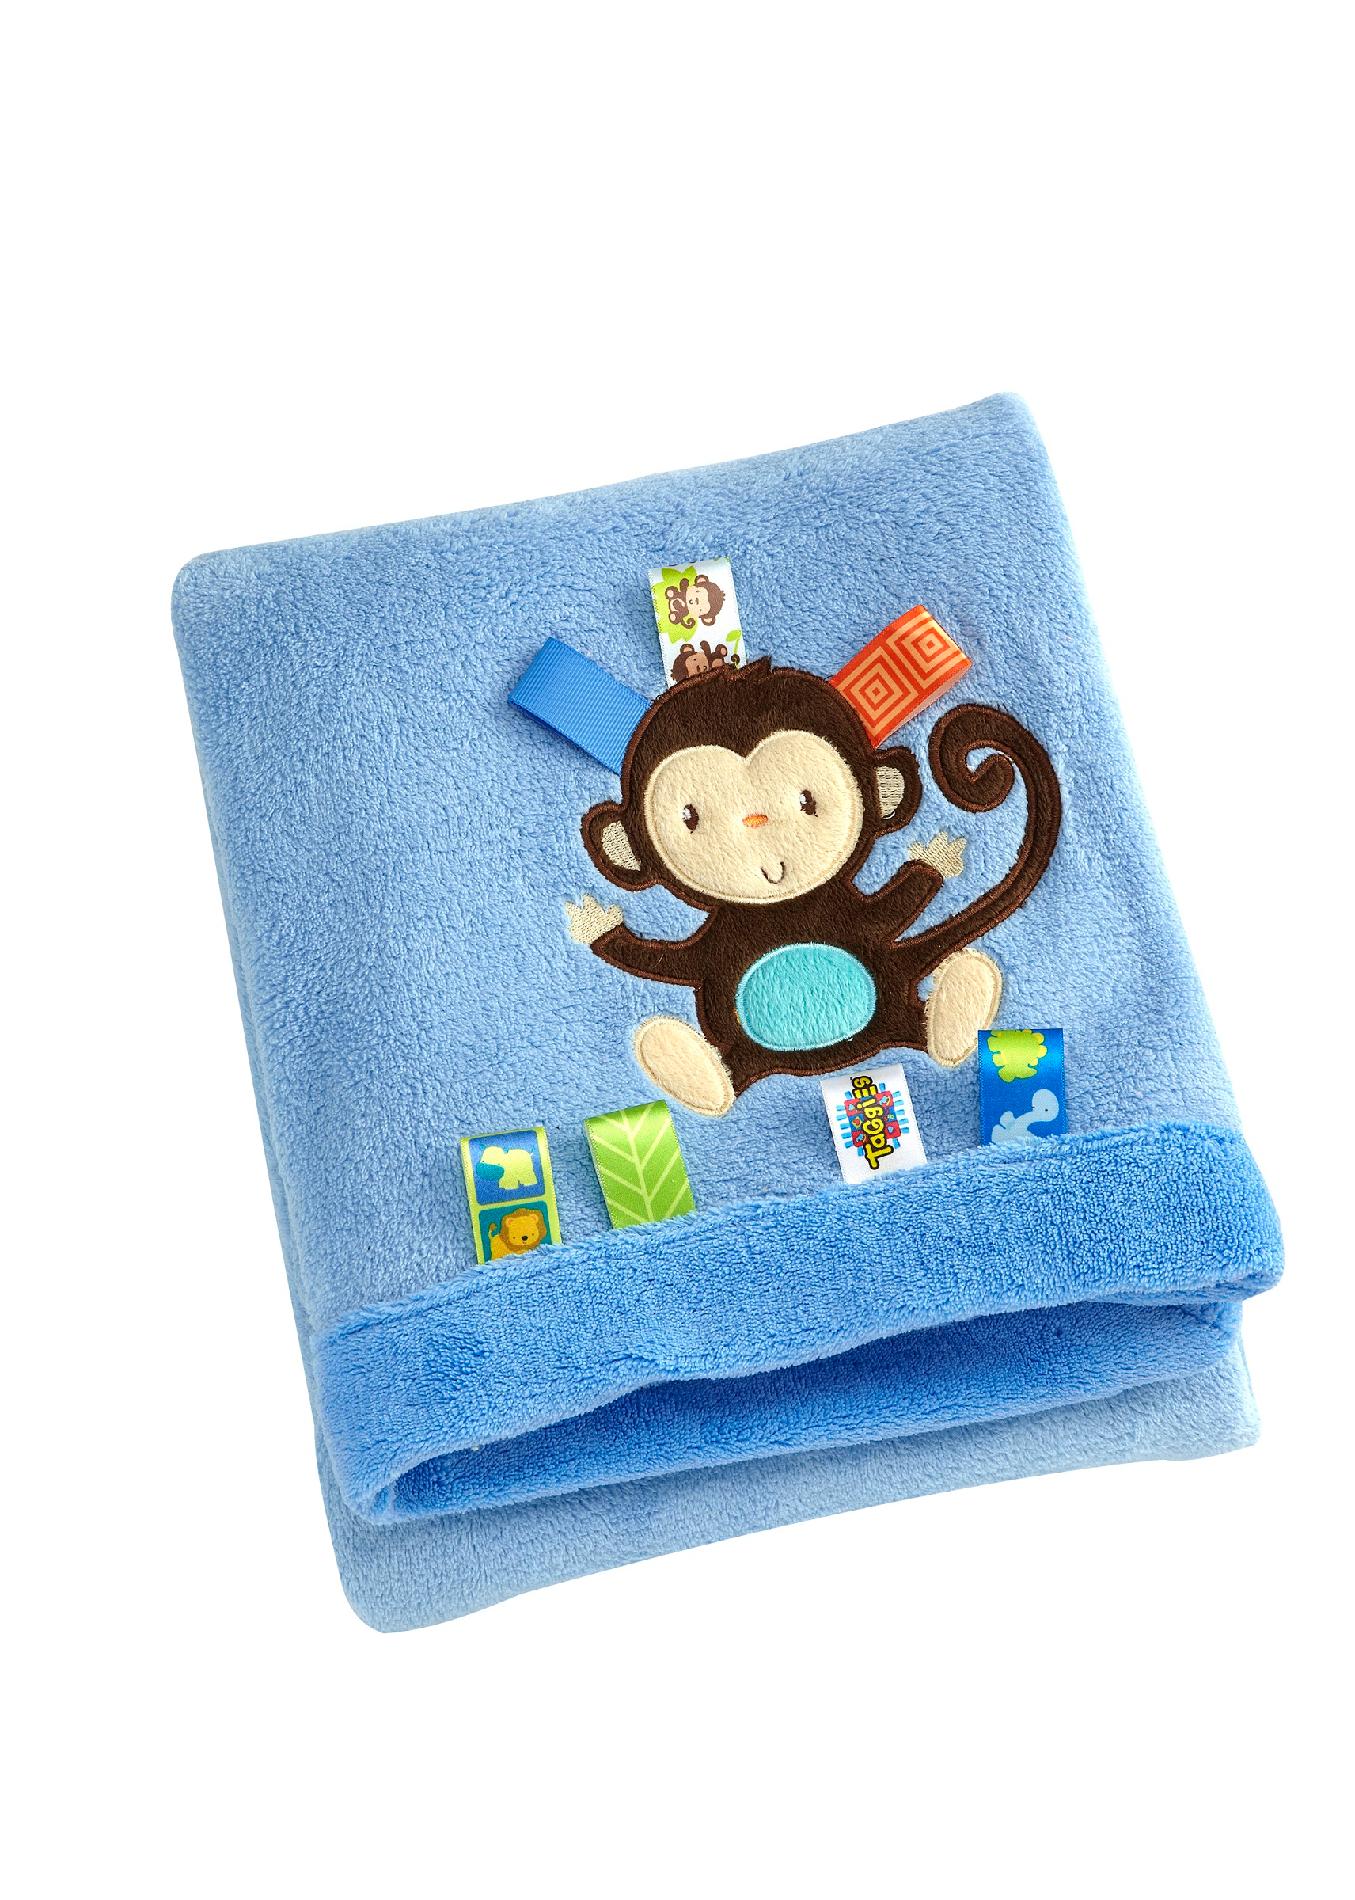 Taggies - Fun in the Jungle Appliqued Coral Fleece Blanket with Coral Border